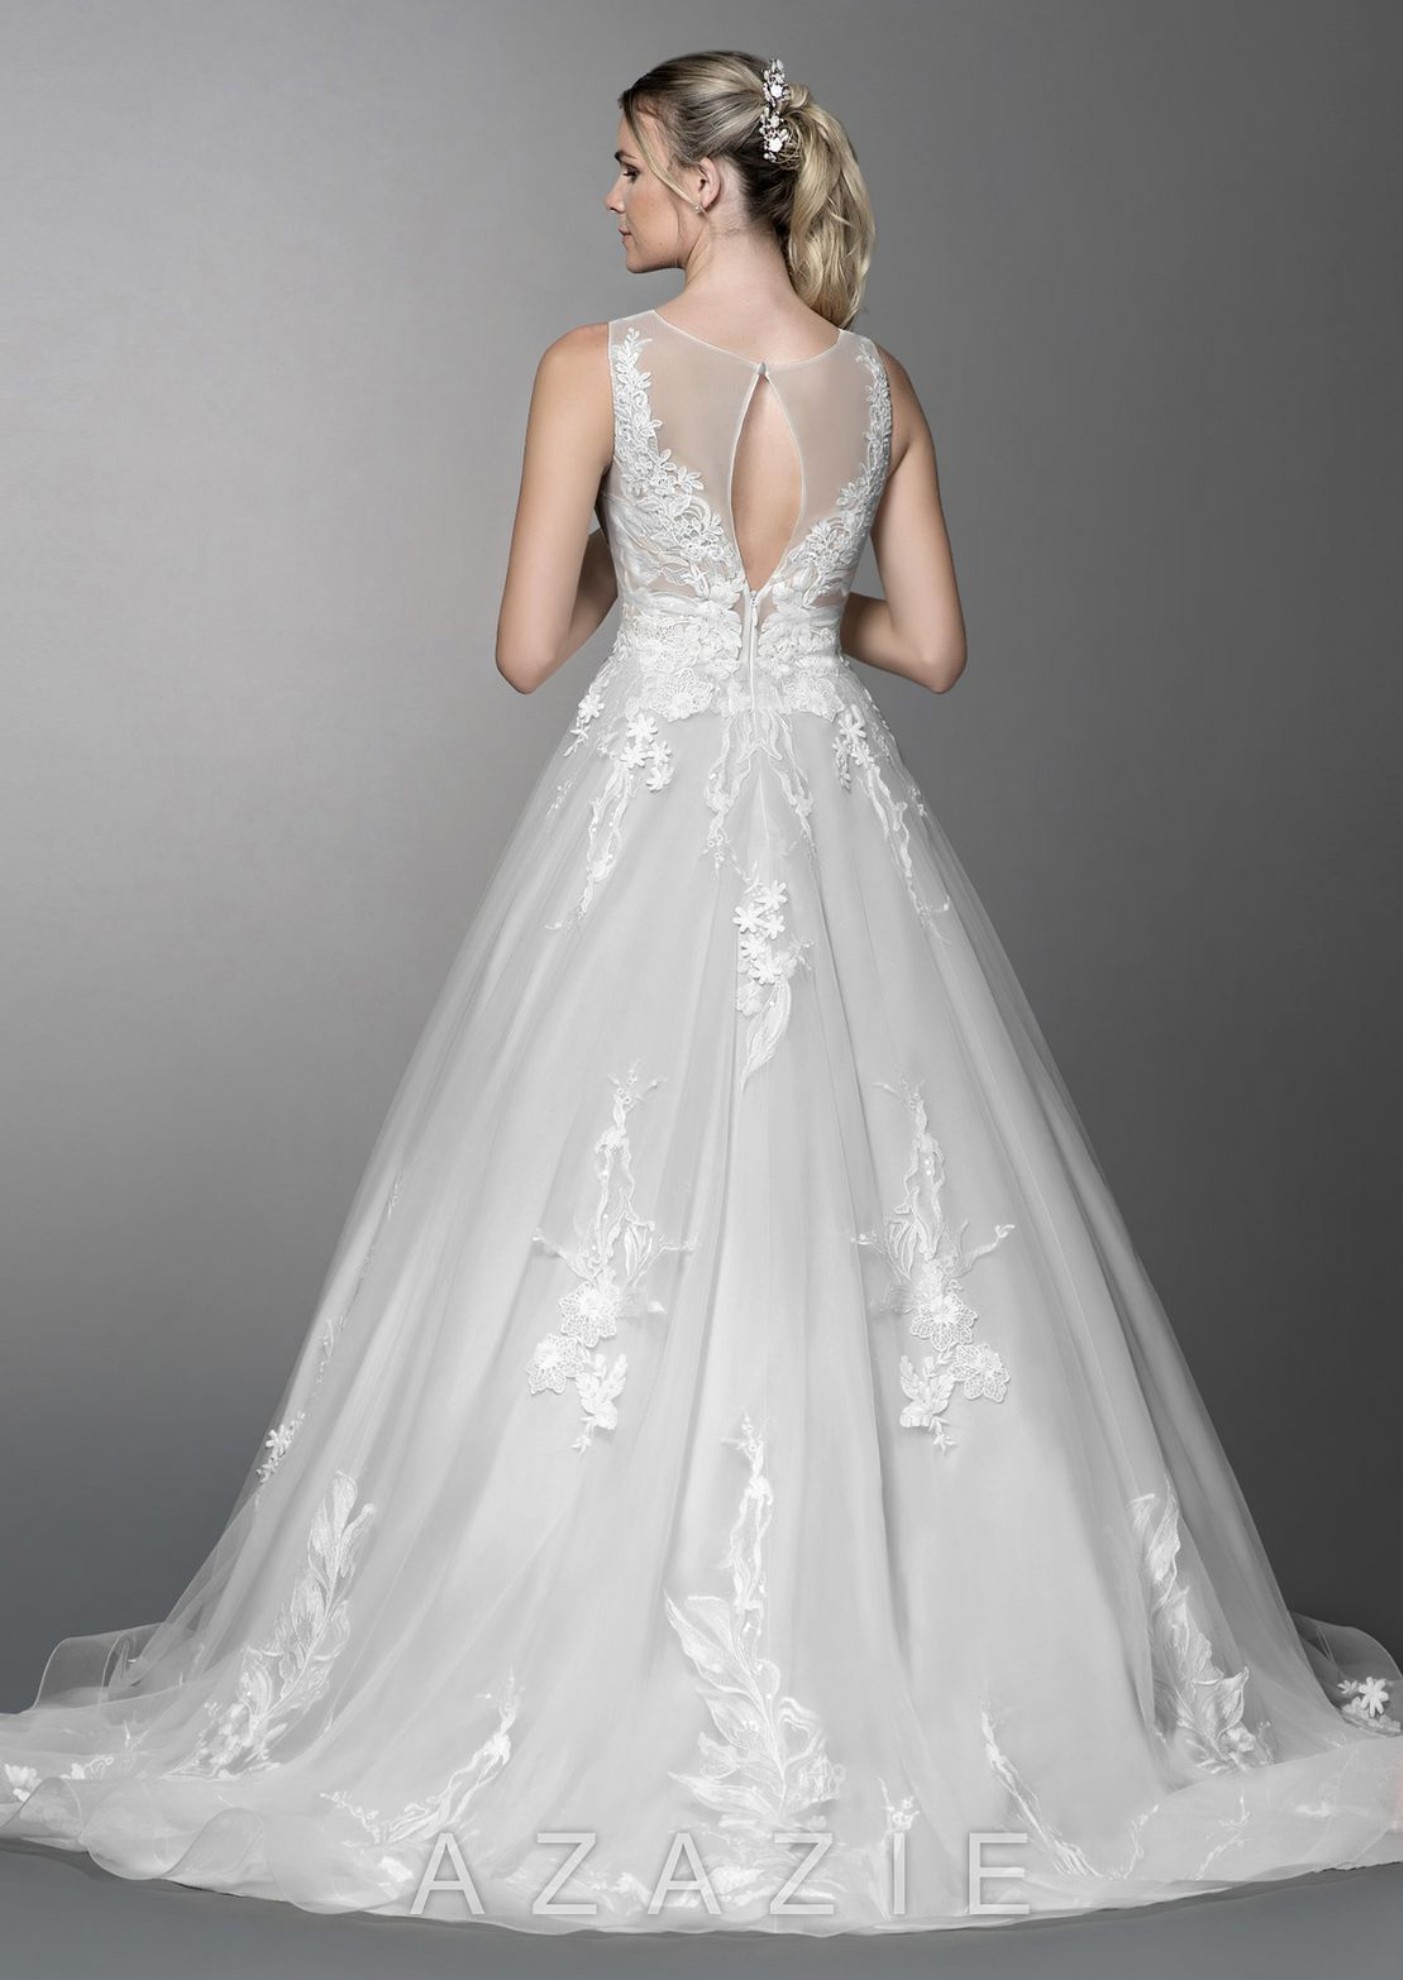 Scalloped V-Neck Lace and Tulle Wedding Dress